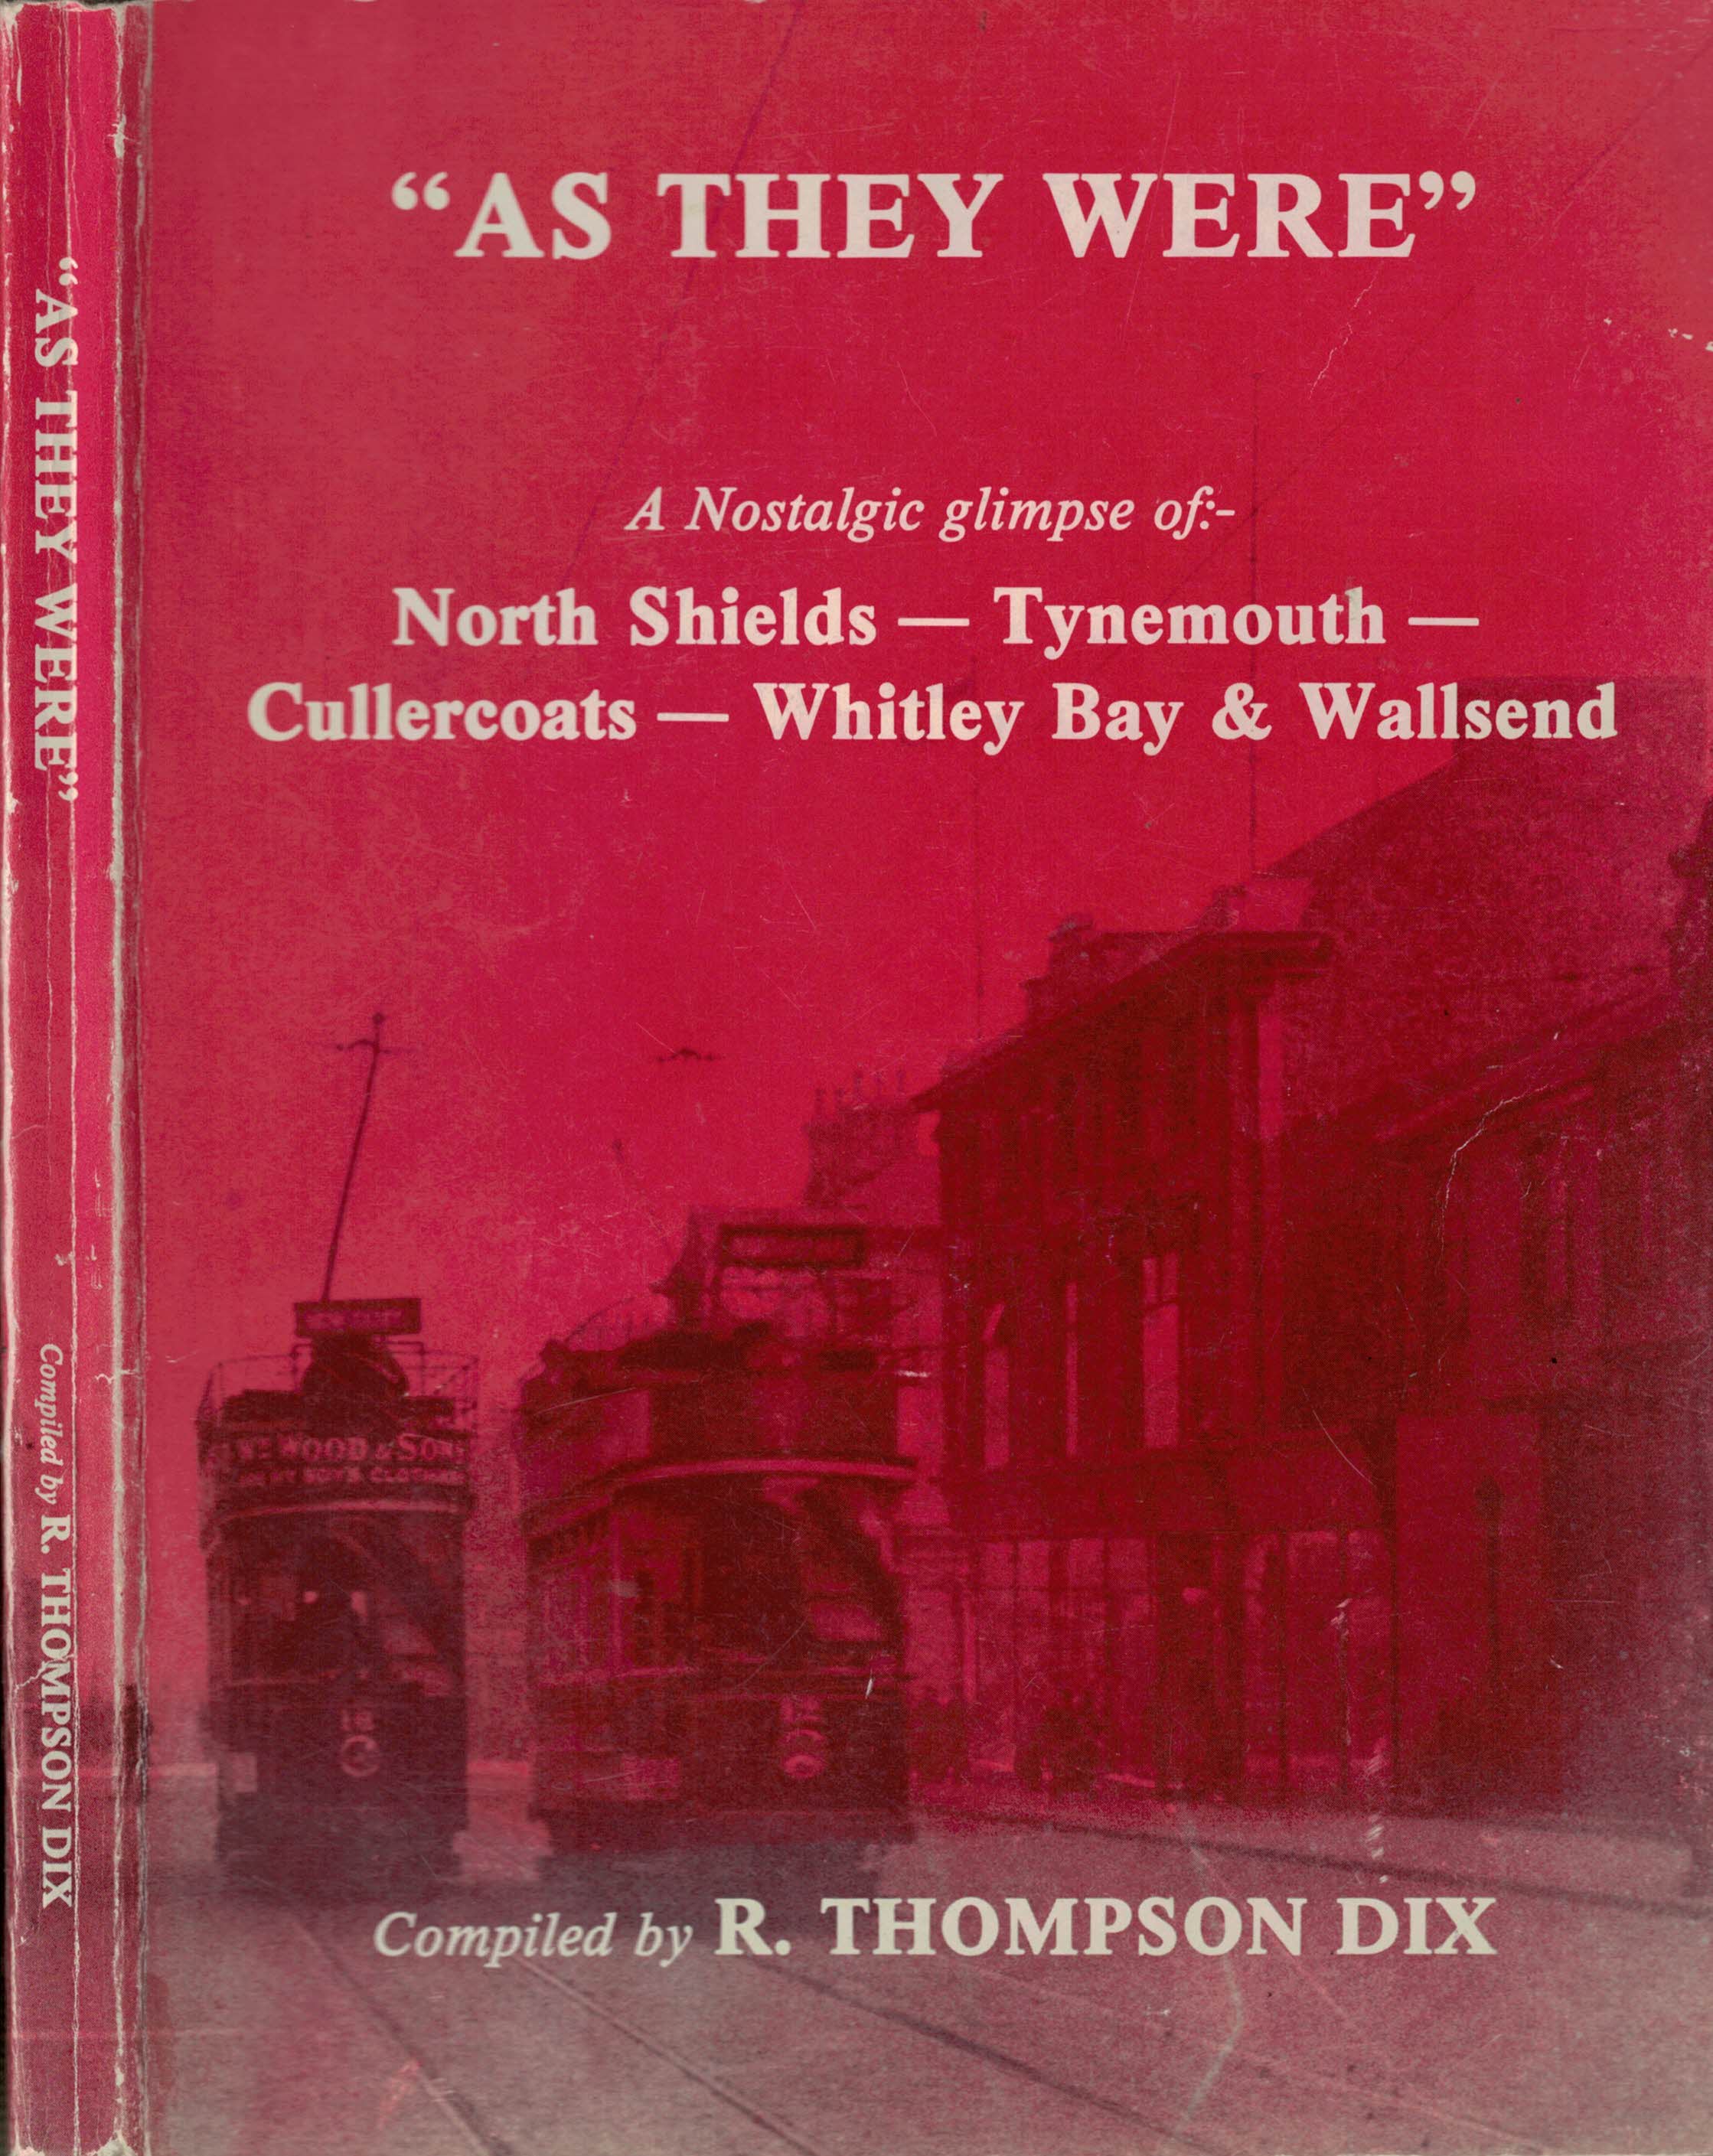 'As They Were'. A Nostalgic Glimpse of North Shields - Tynemouth - Cullercoats - Whitley Bay & Wallsend.